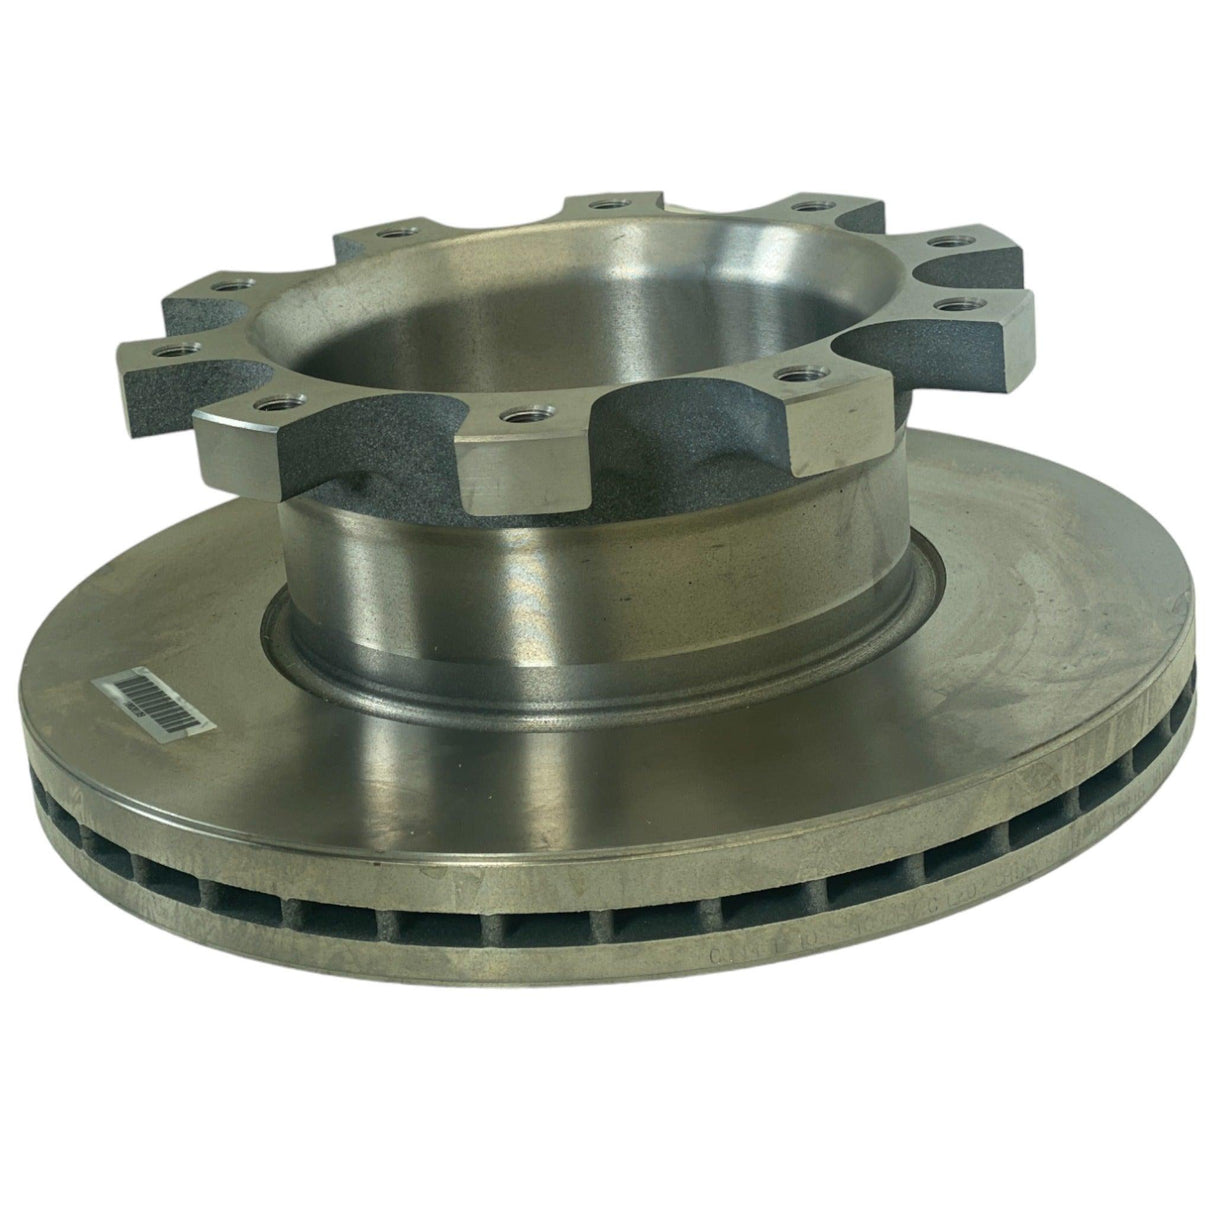 CM10020682 Genuine Conment® Disc Brake Rotor Replacement.